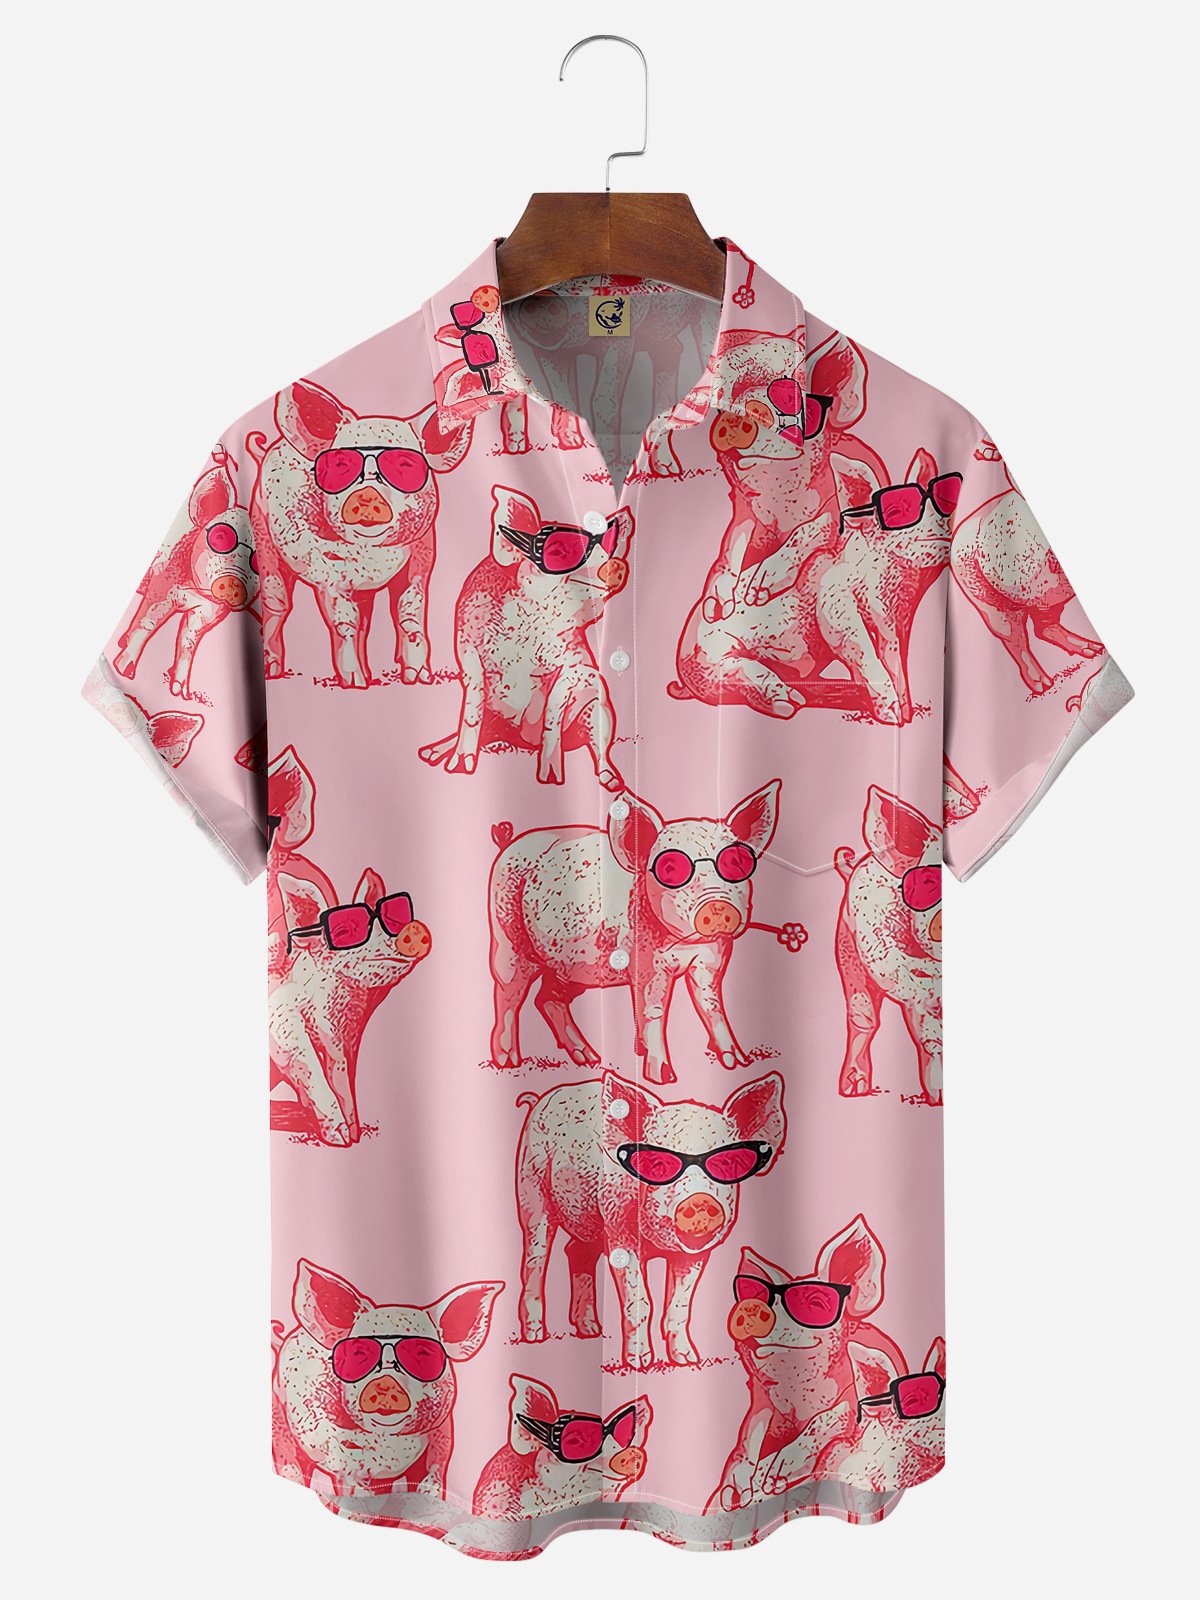 Hardaddy Funky Pig Chest Pocket Short Sleeve Casual Shirt